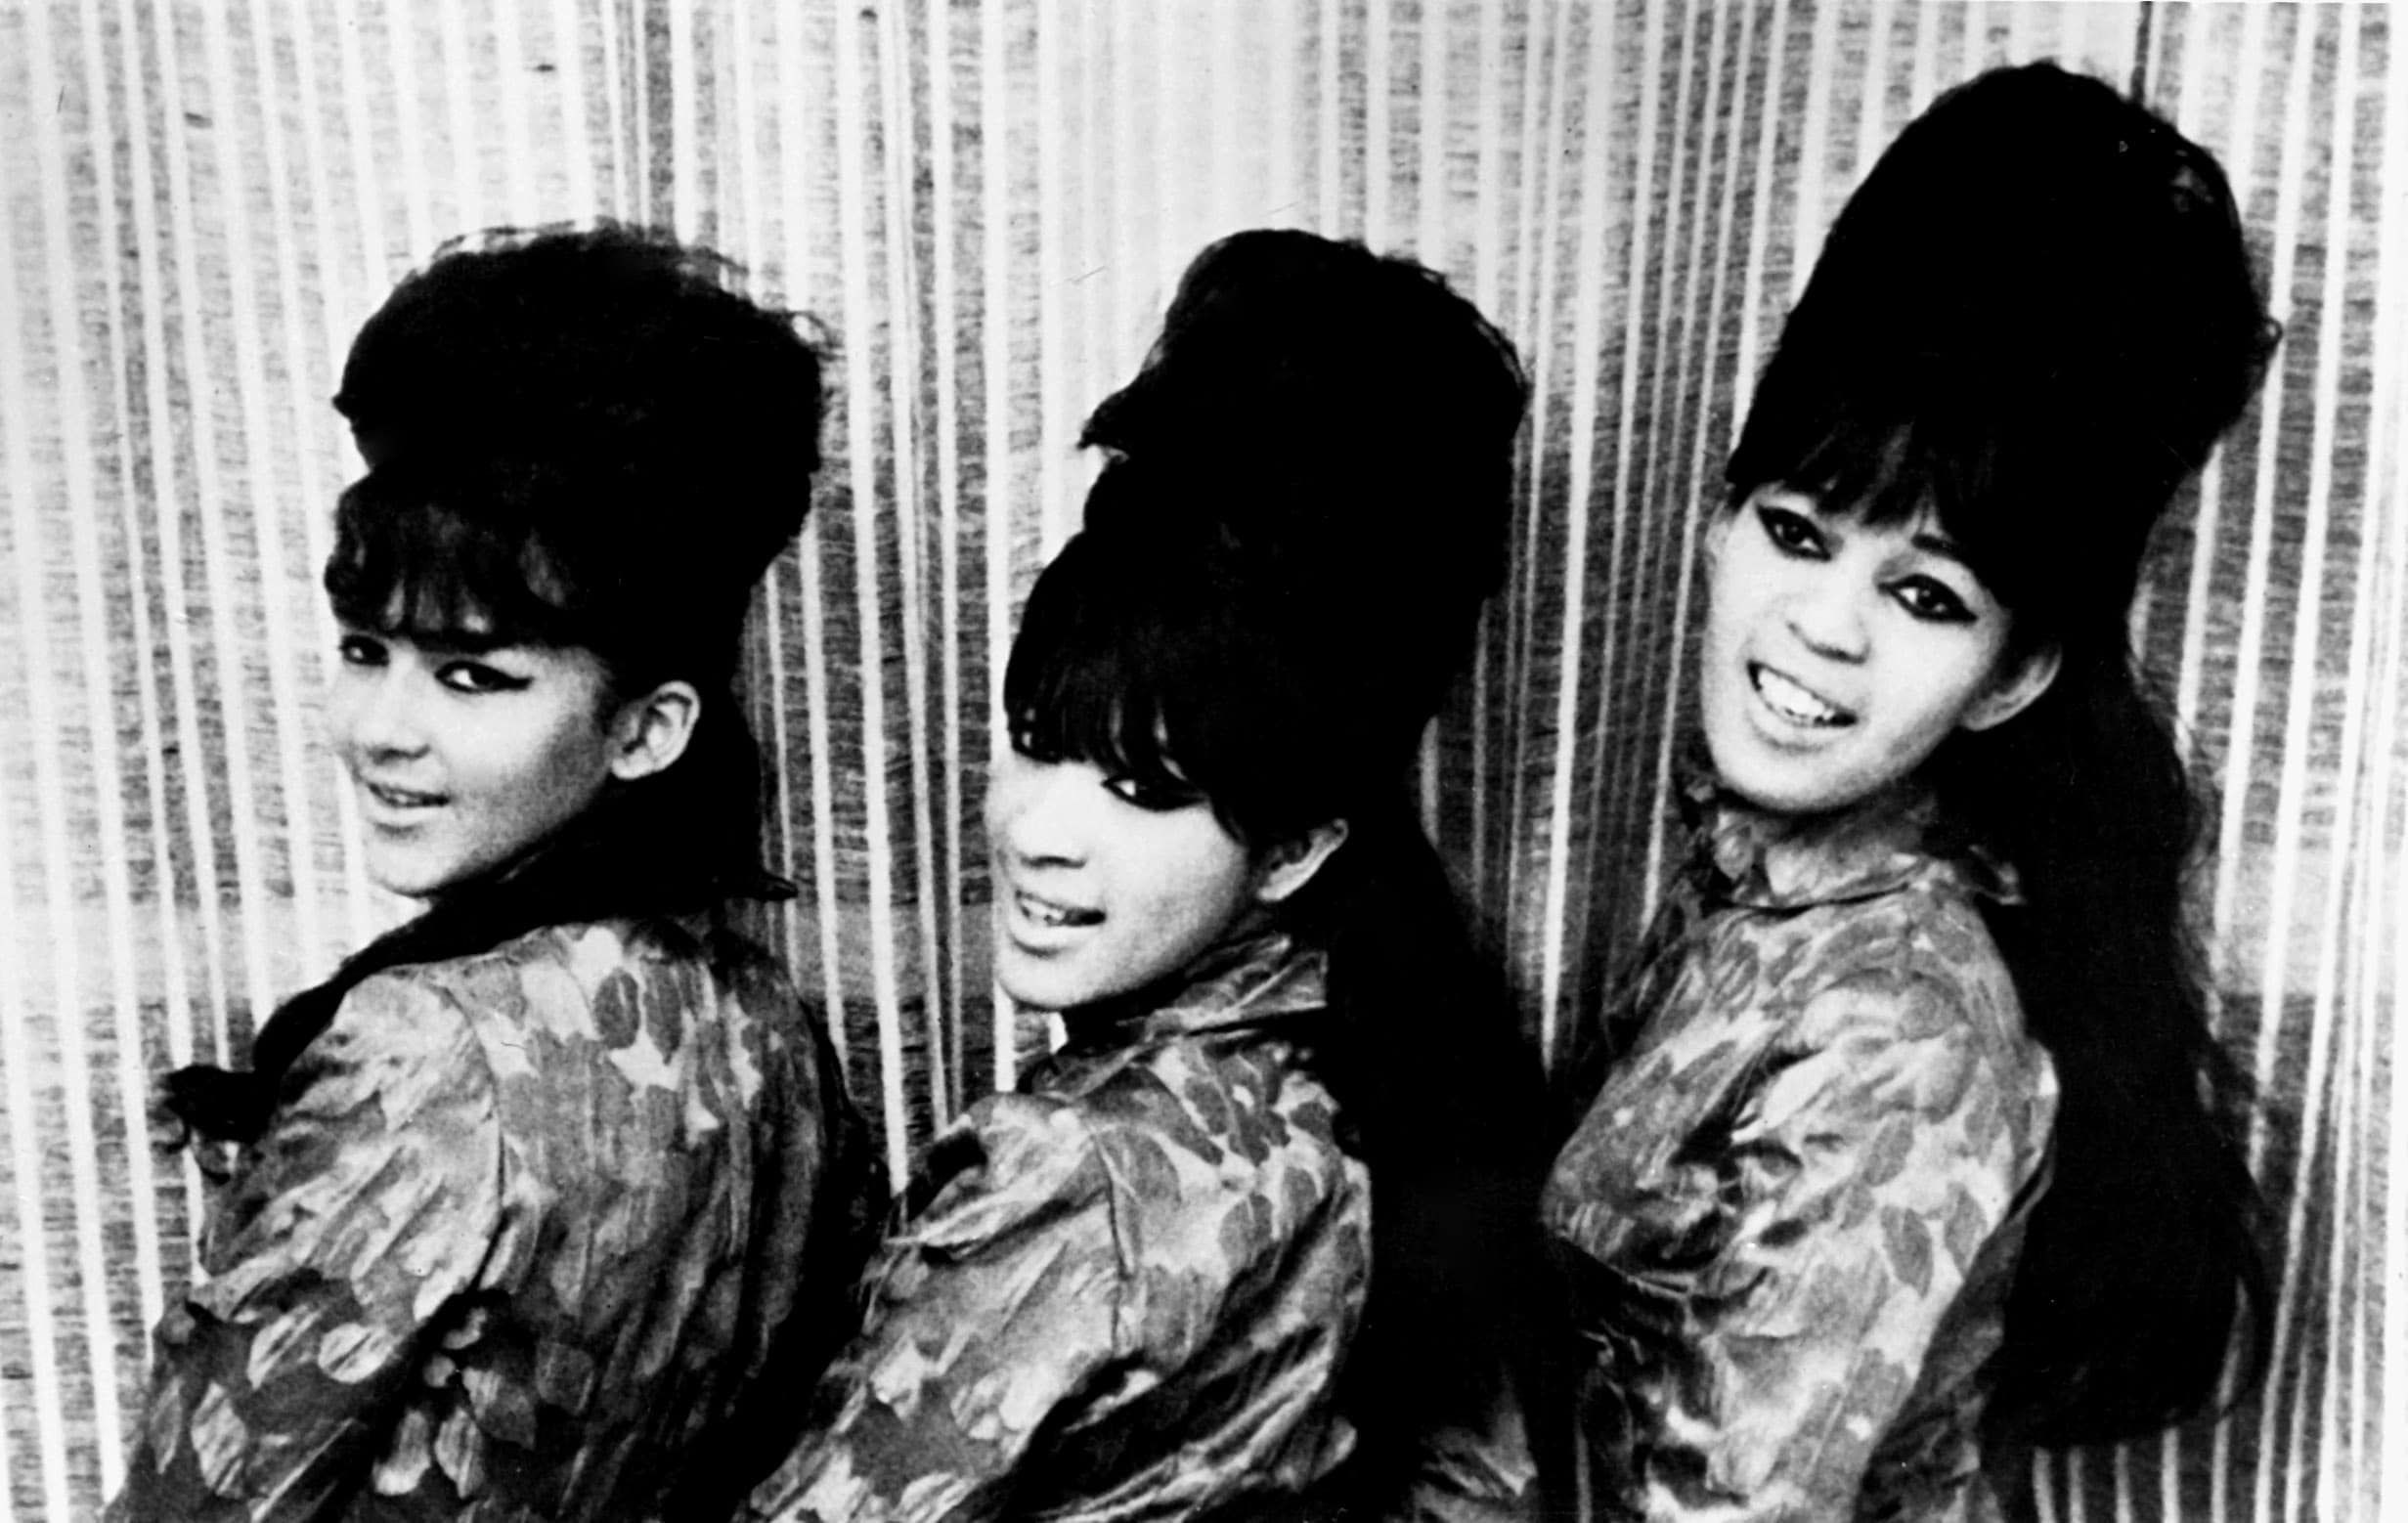 THE RONETTES